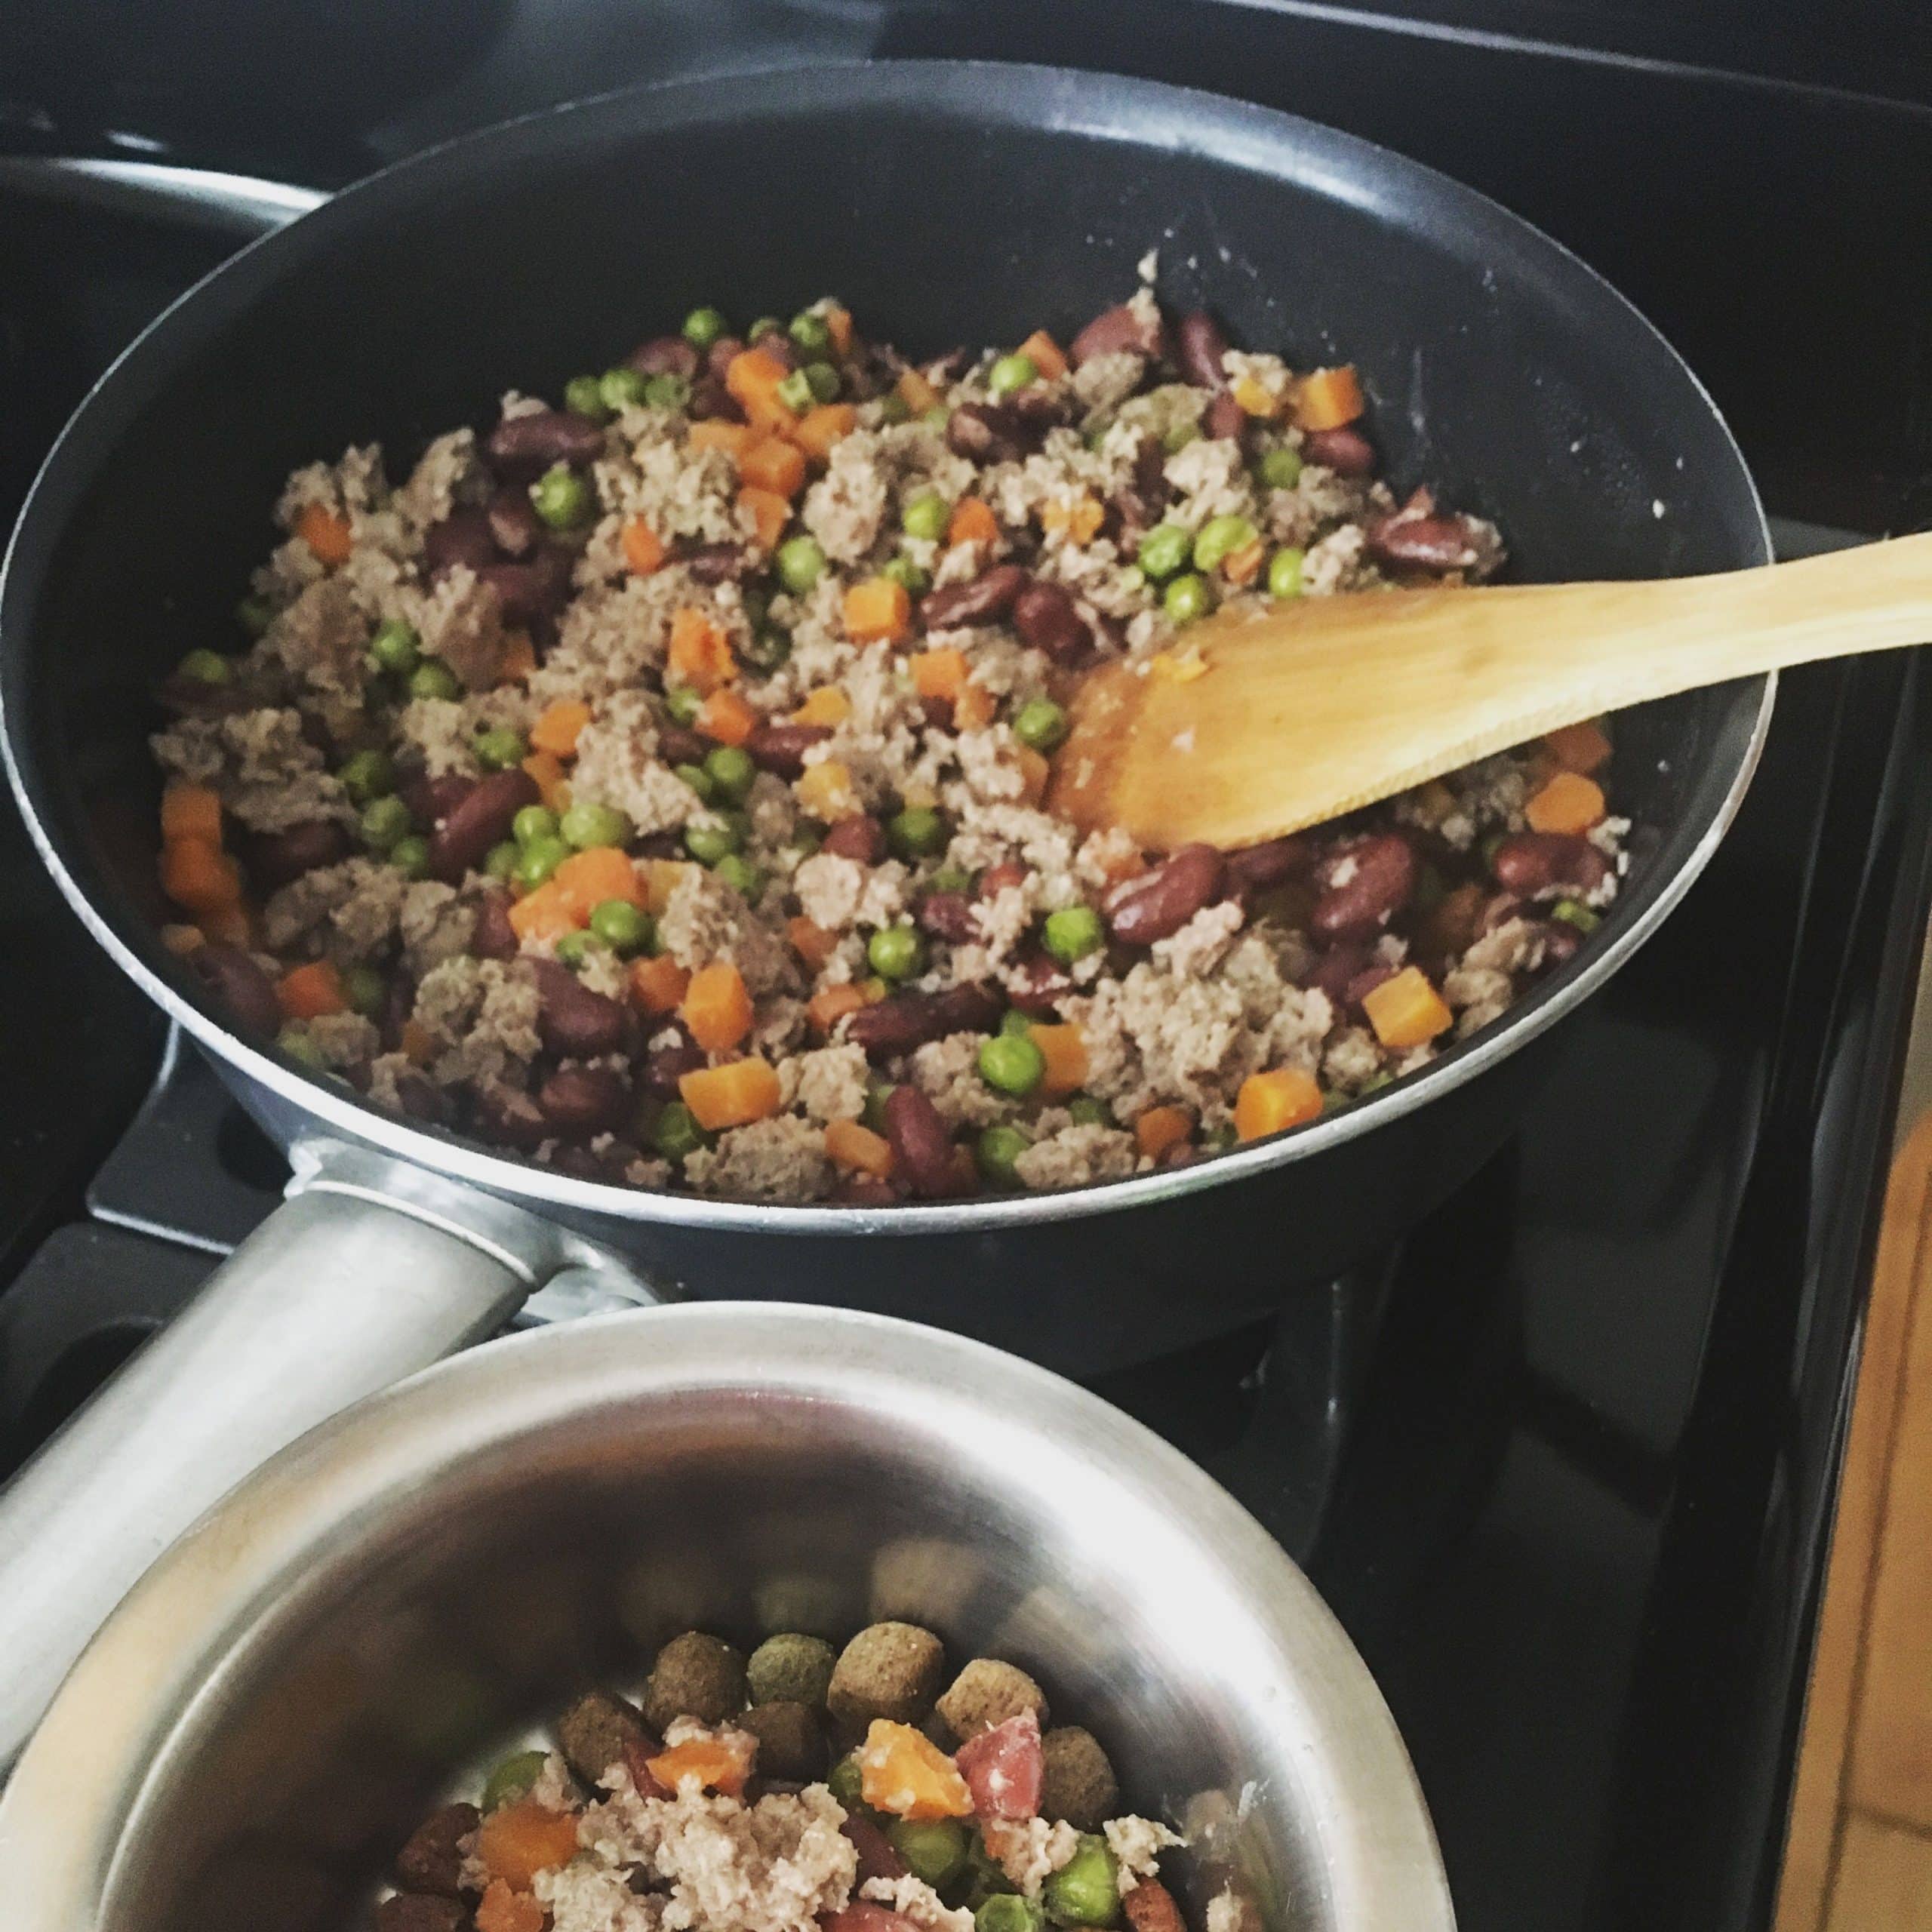 Ground turkey, peas, carrots, and kidney beans Homemade dog food